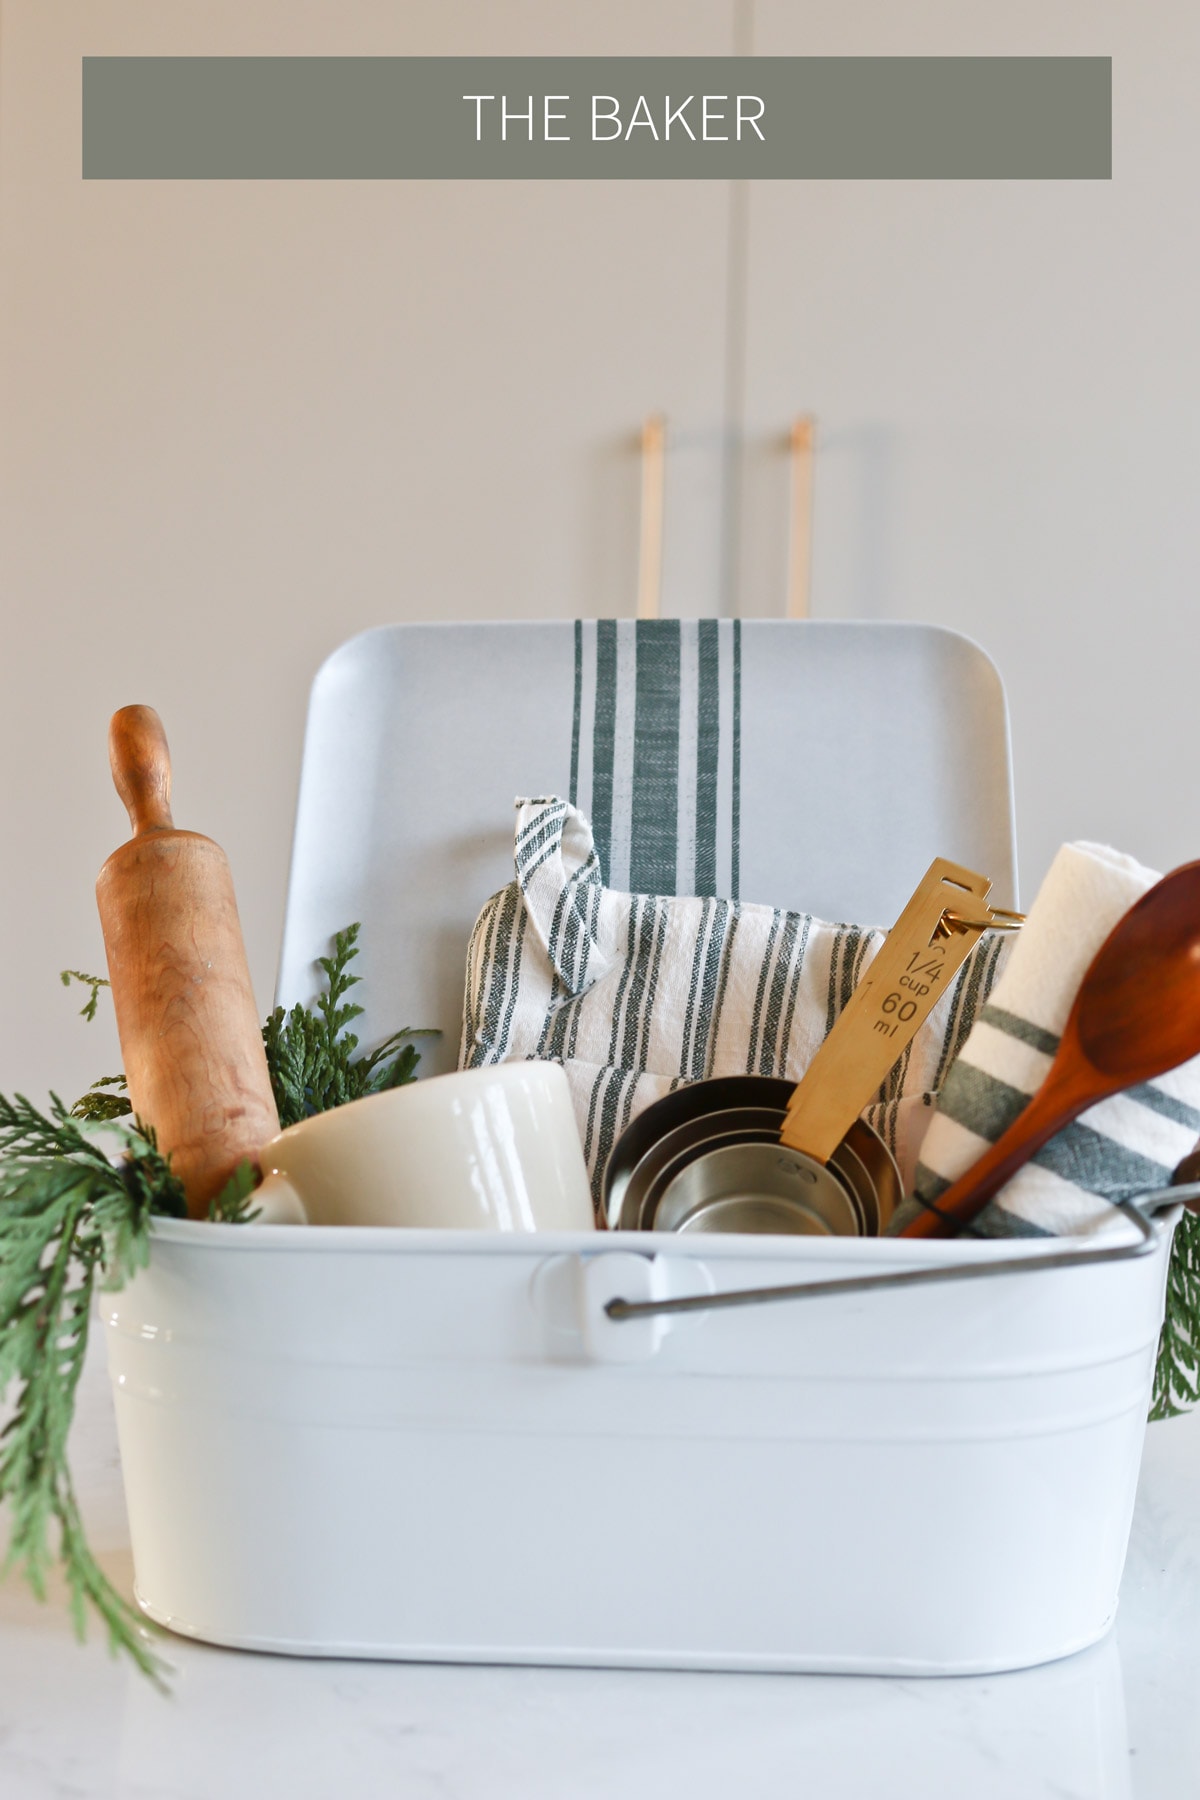 baker gift basket idea for grandma that includes measuring cups, a rolling pin, a wooden spoon, and towels